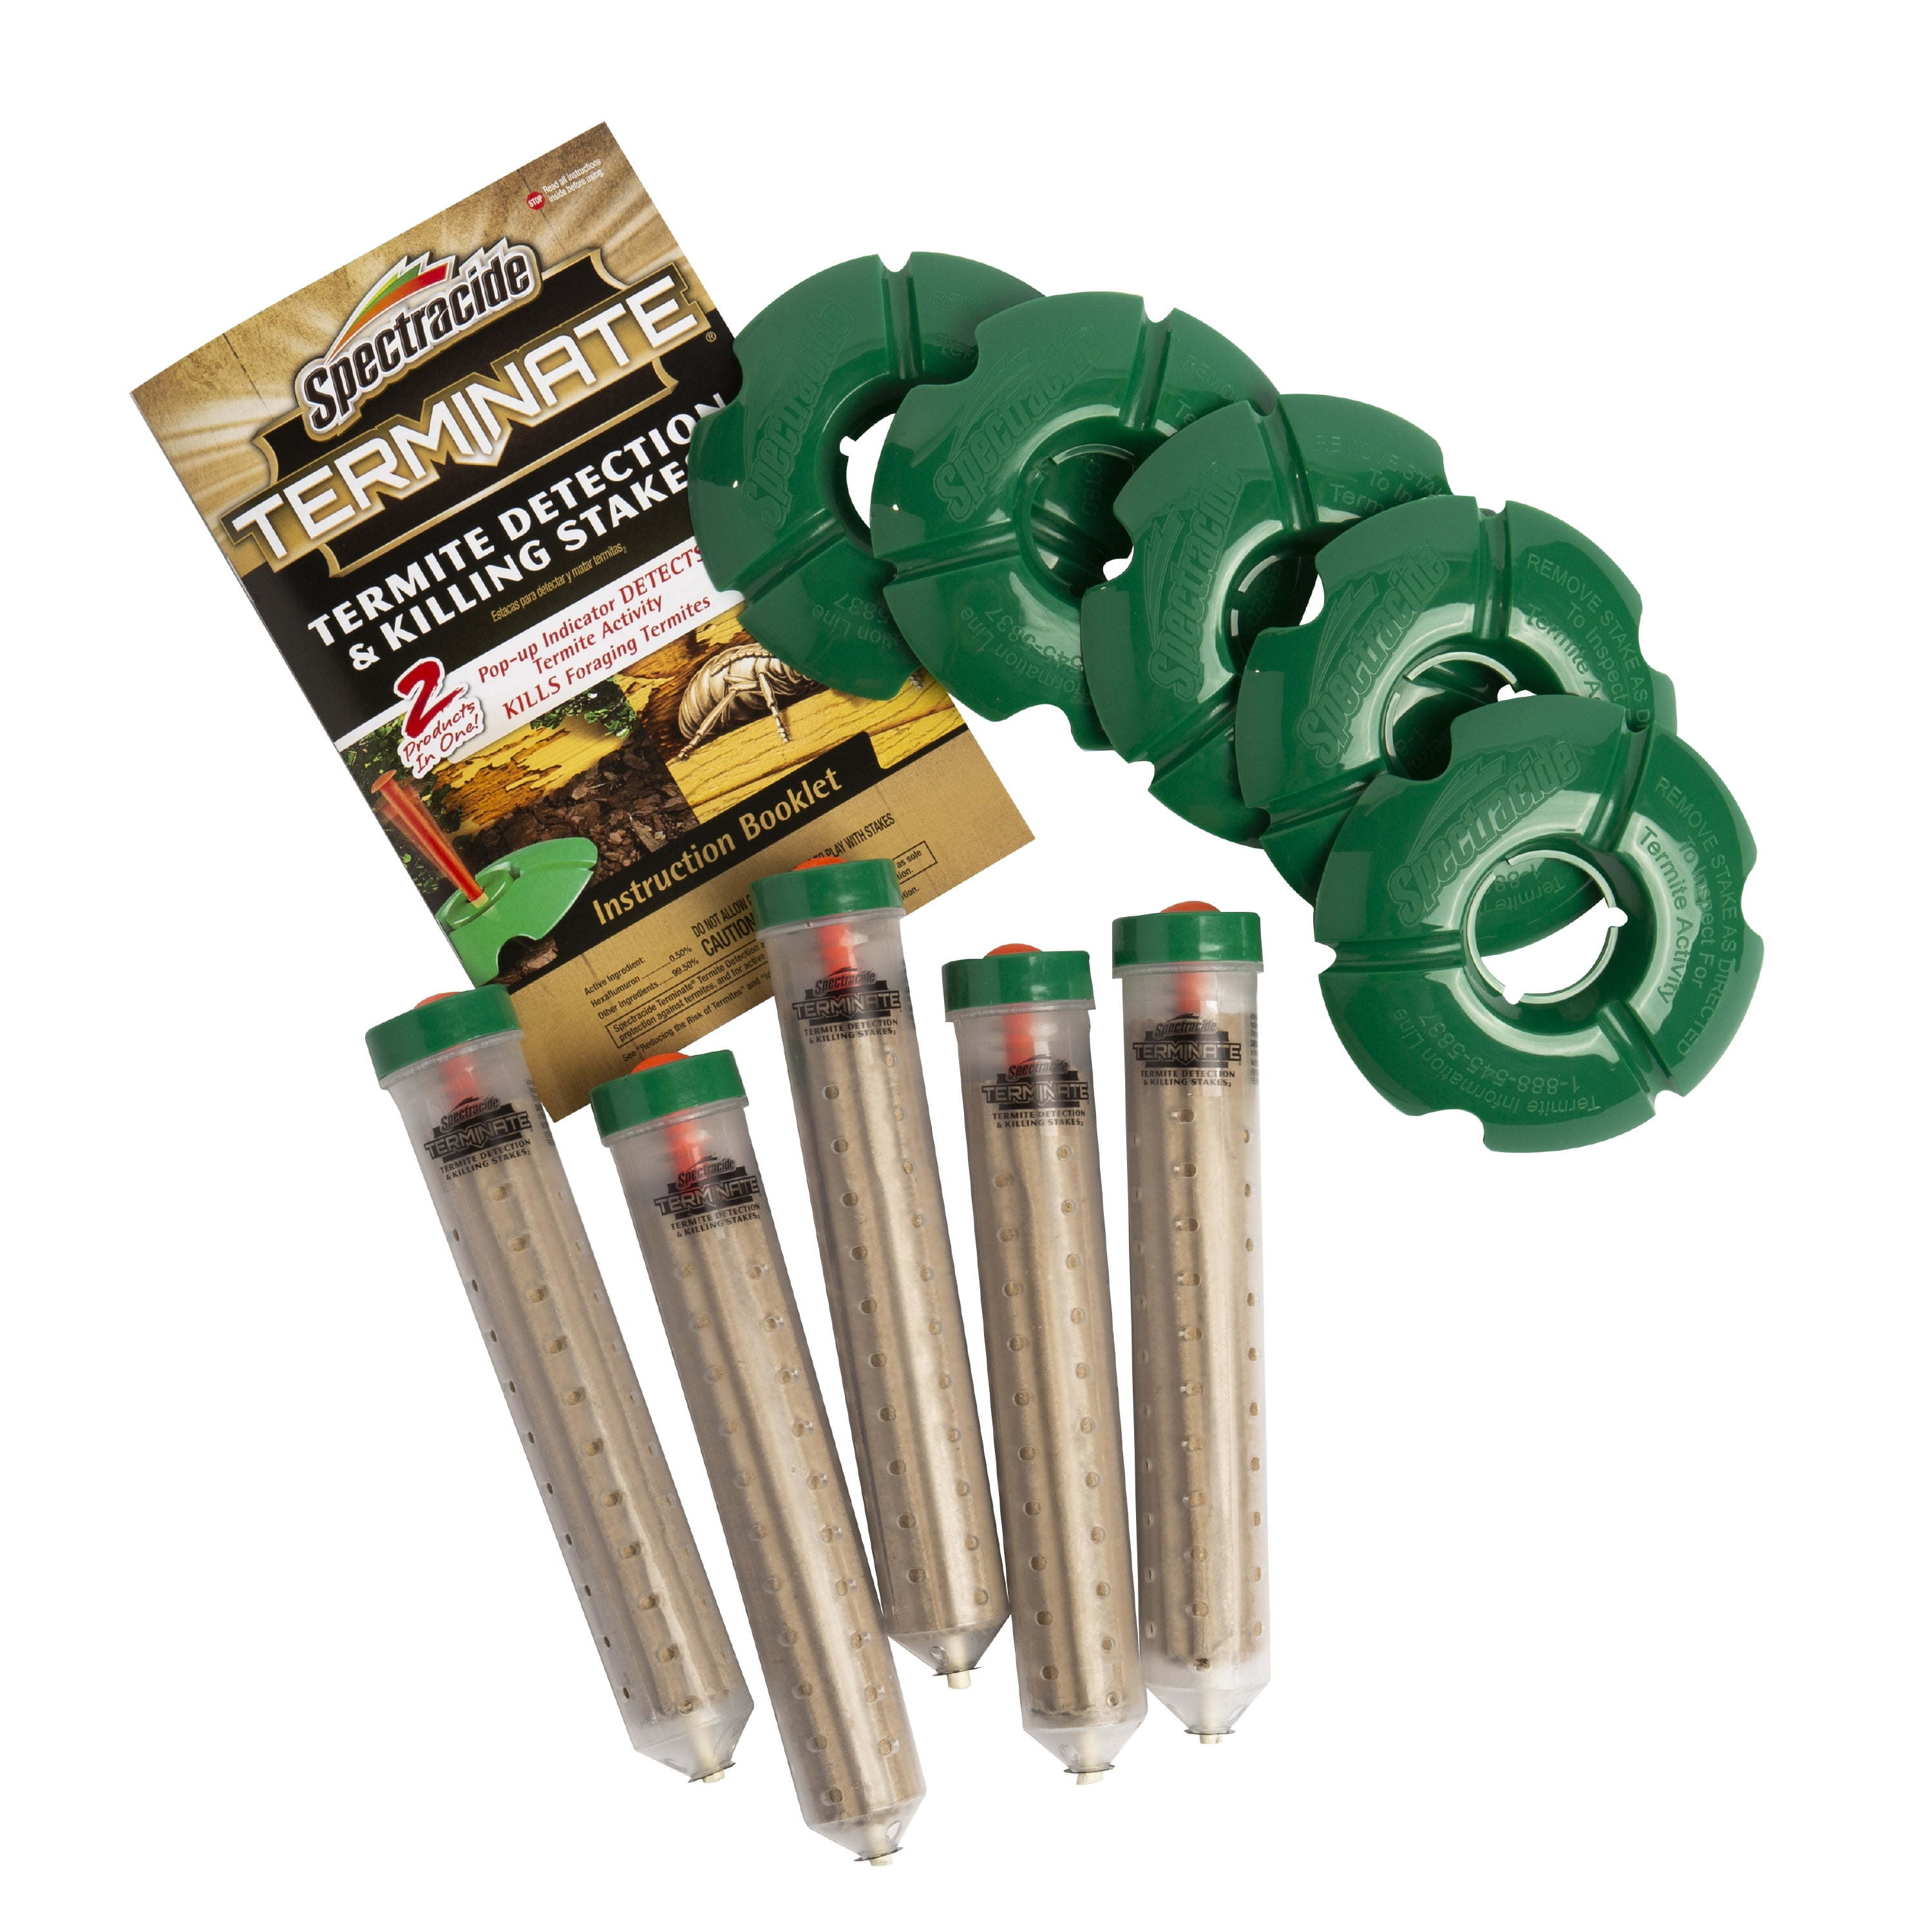 Spectracide Terminate Termite Detection and Killing Stakes, Refill